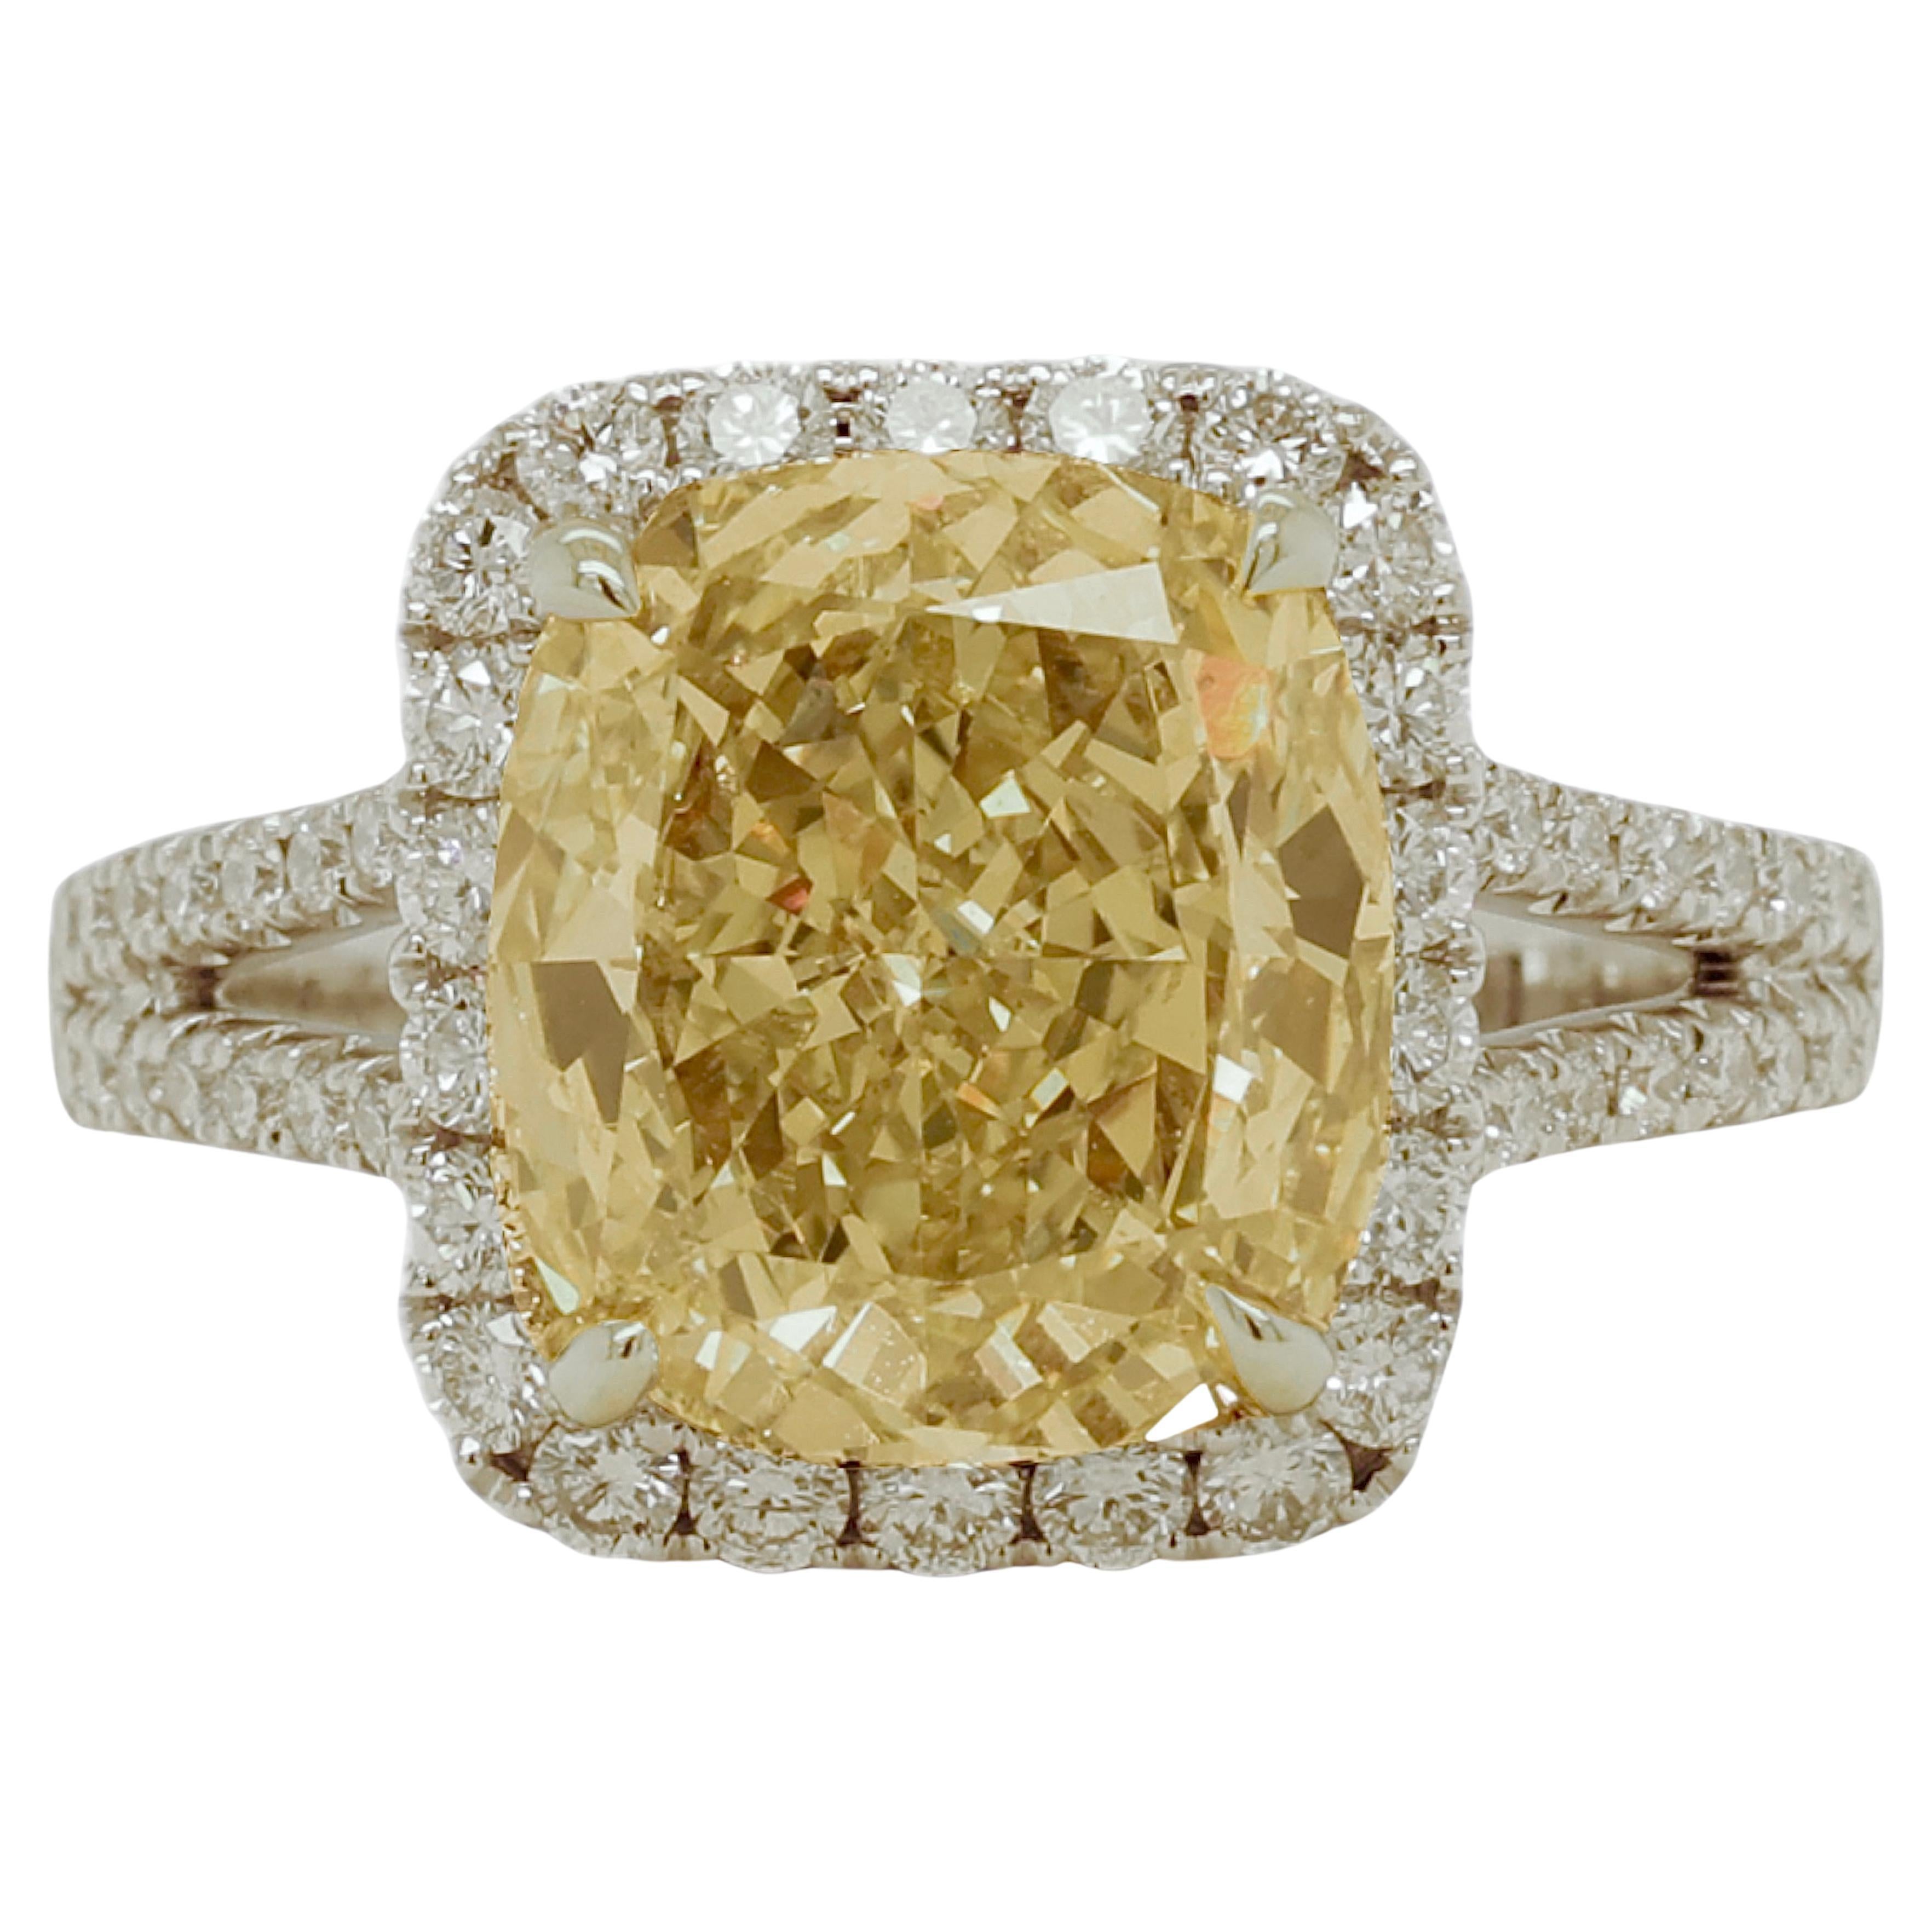 18 kt. White Gold Engagement Ring With Large 5 Ct Fancy Light Yellow Diamond For Sale